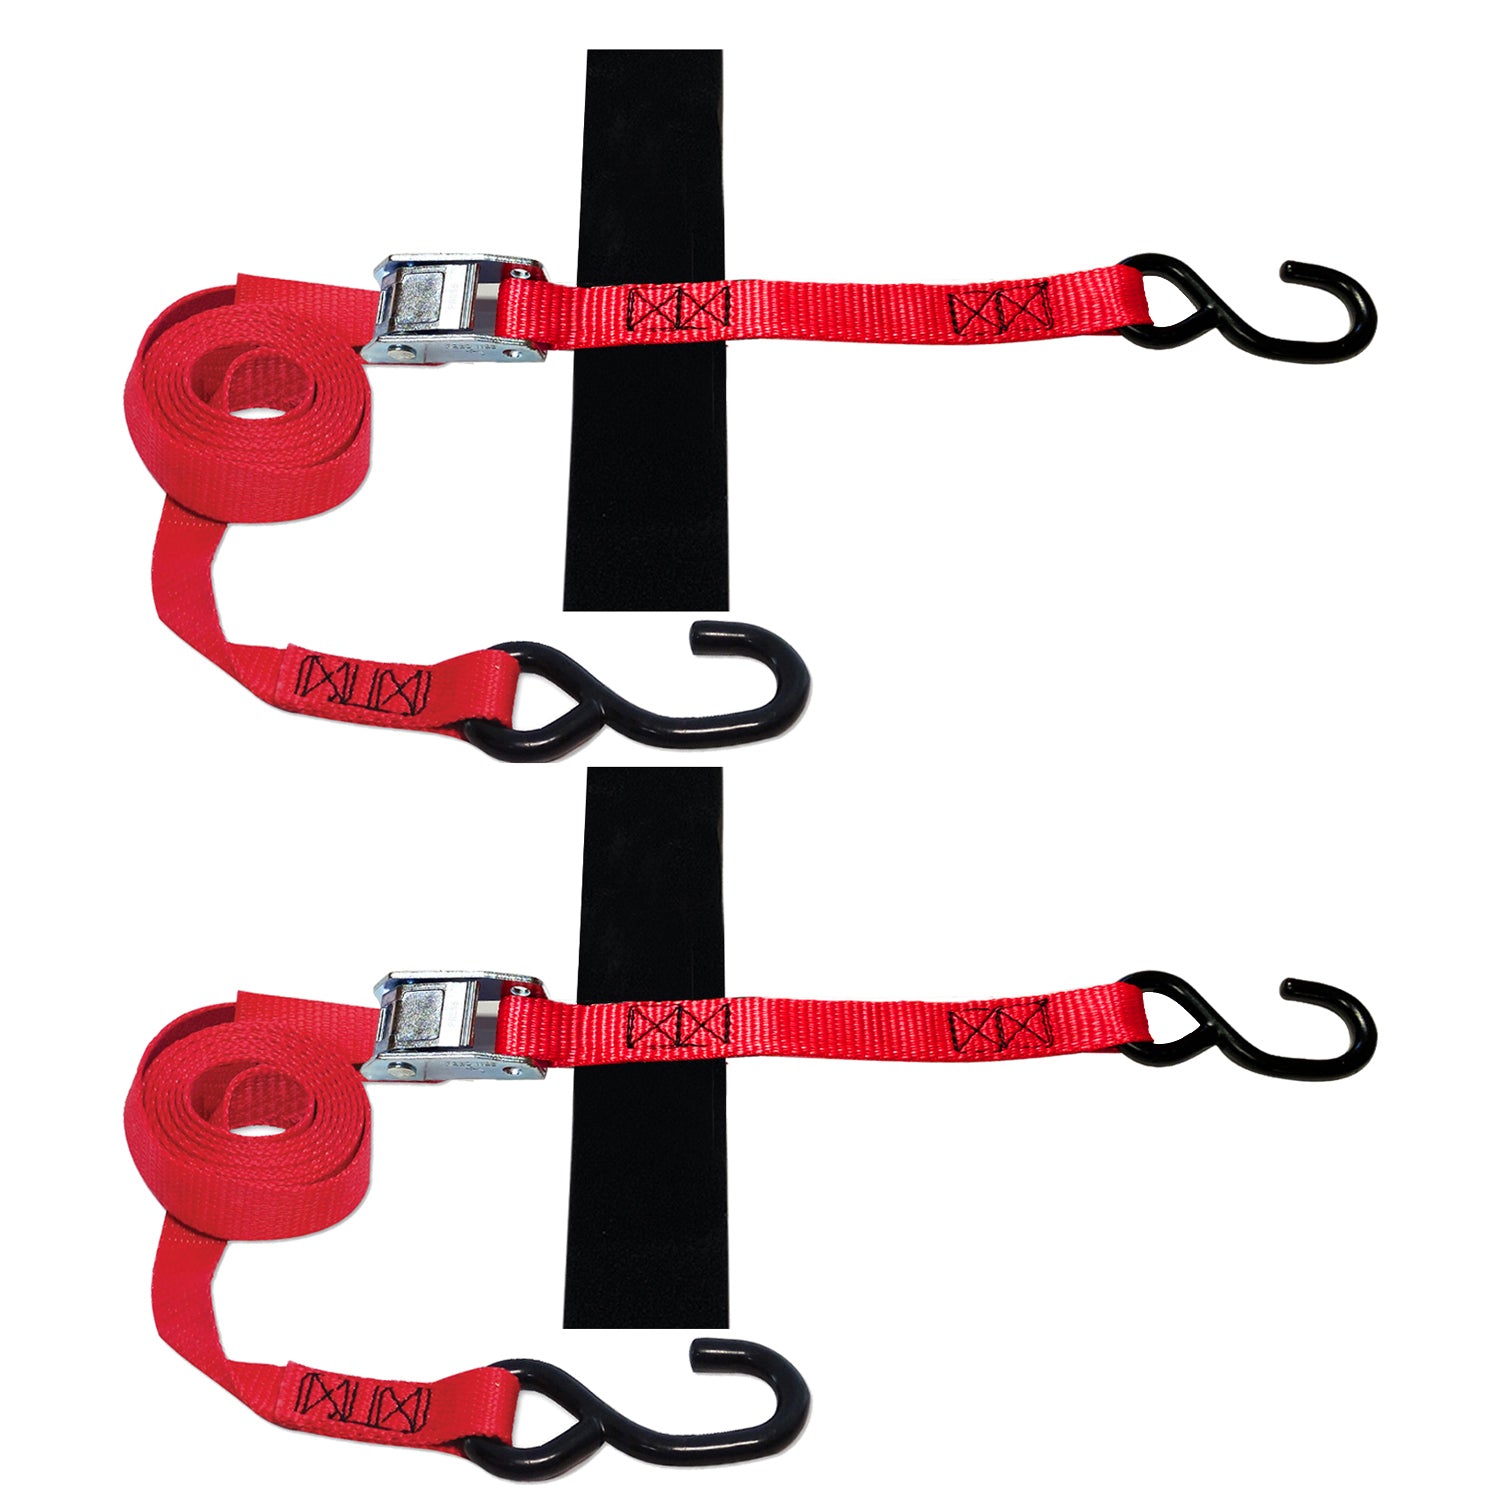 SNAP-LOC 1 in x 8 ft S-Hook Cam Strap Tie-Down 1,500 lb 2-Pack – SNAP-LOC  CARGO CONTROL